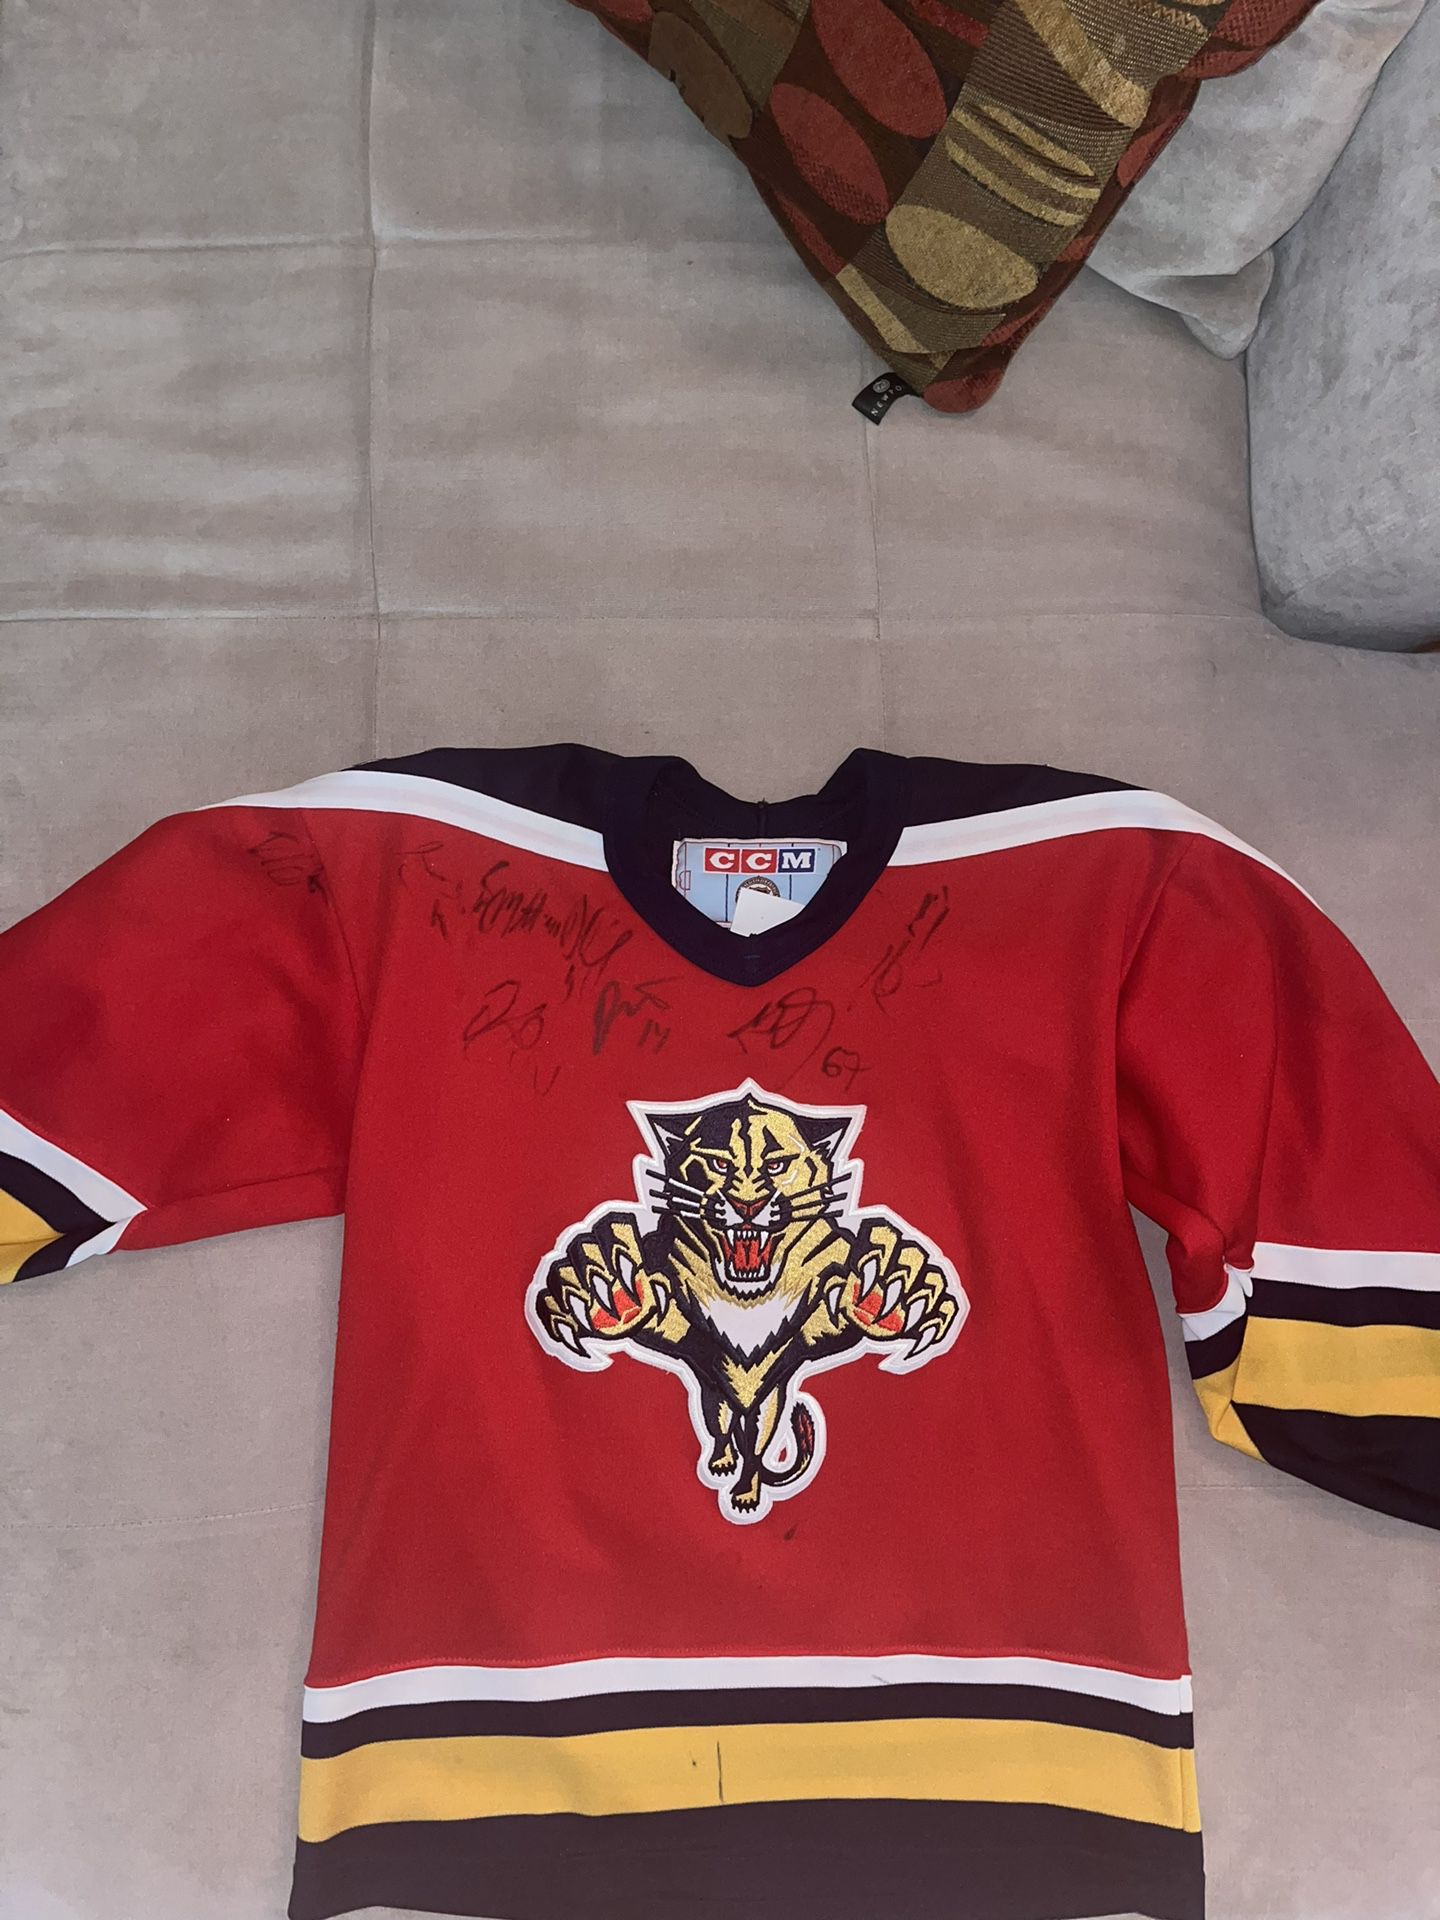 Florida Panthers Jerseys  New, Preowned, and Vintage